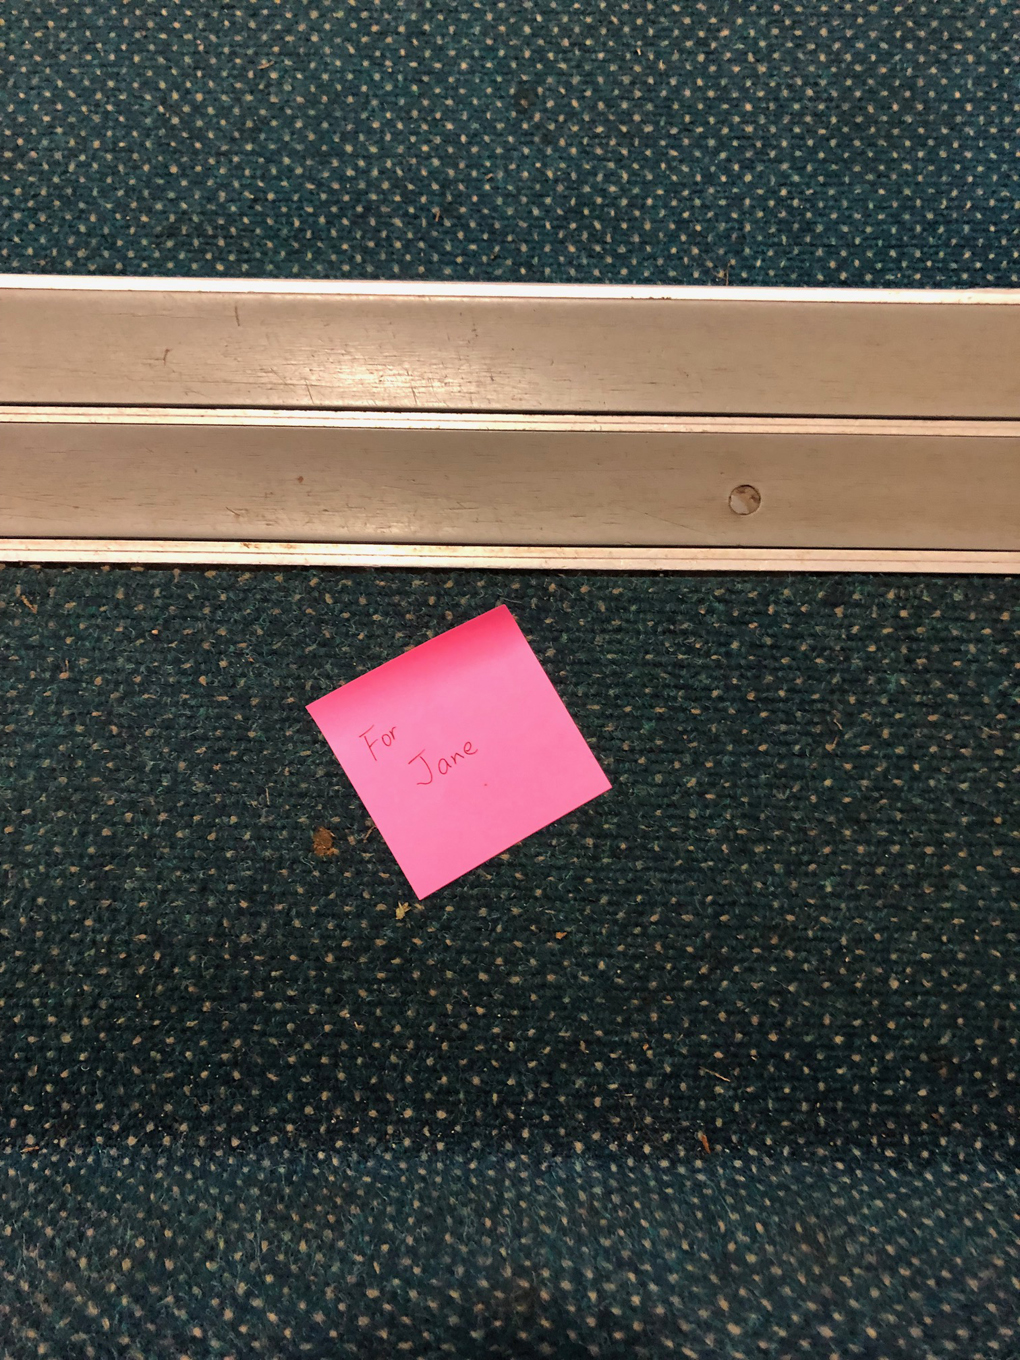 A pink post it note with the words For Jane written on it